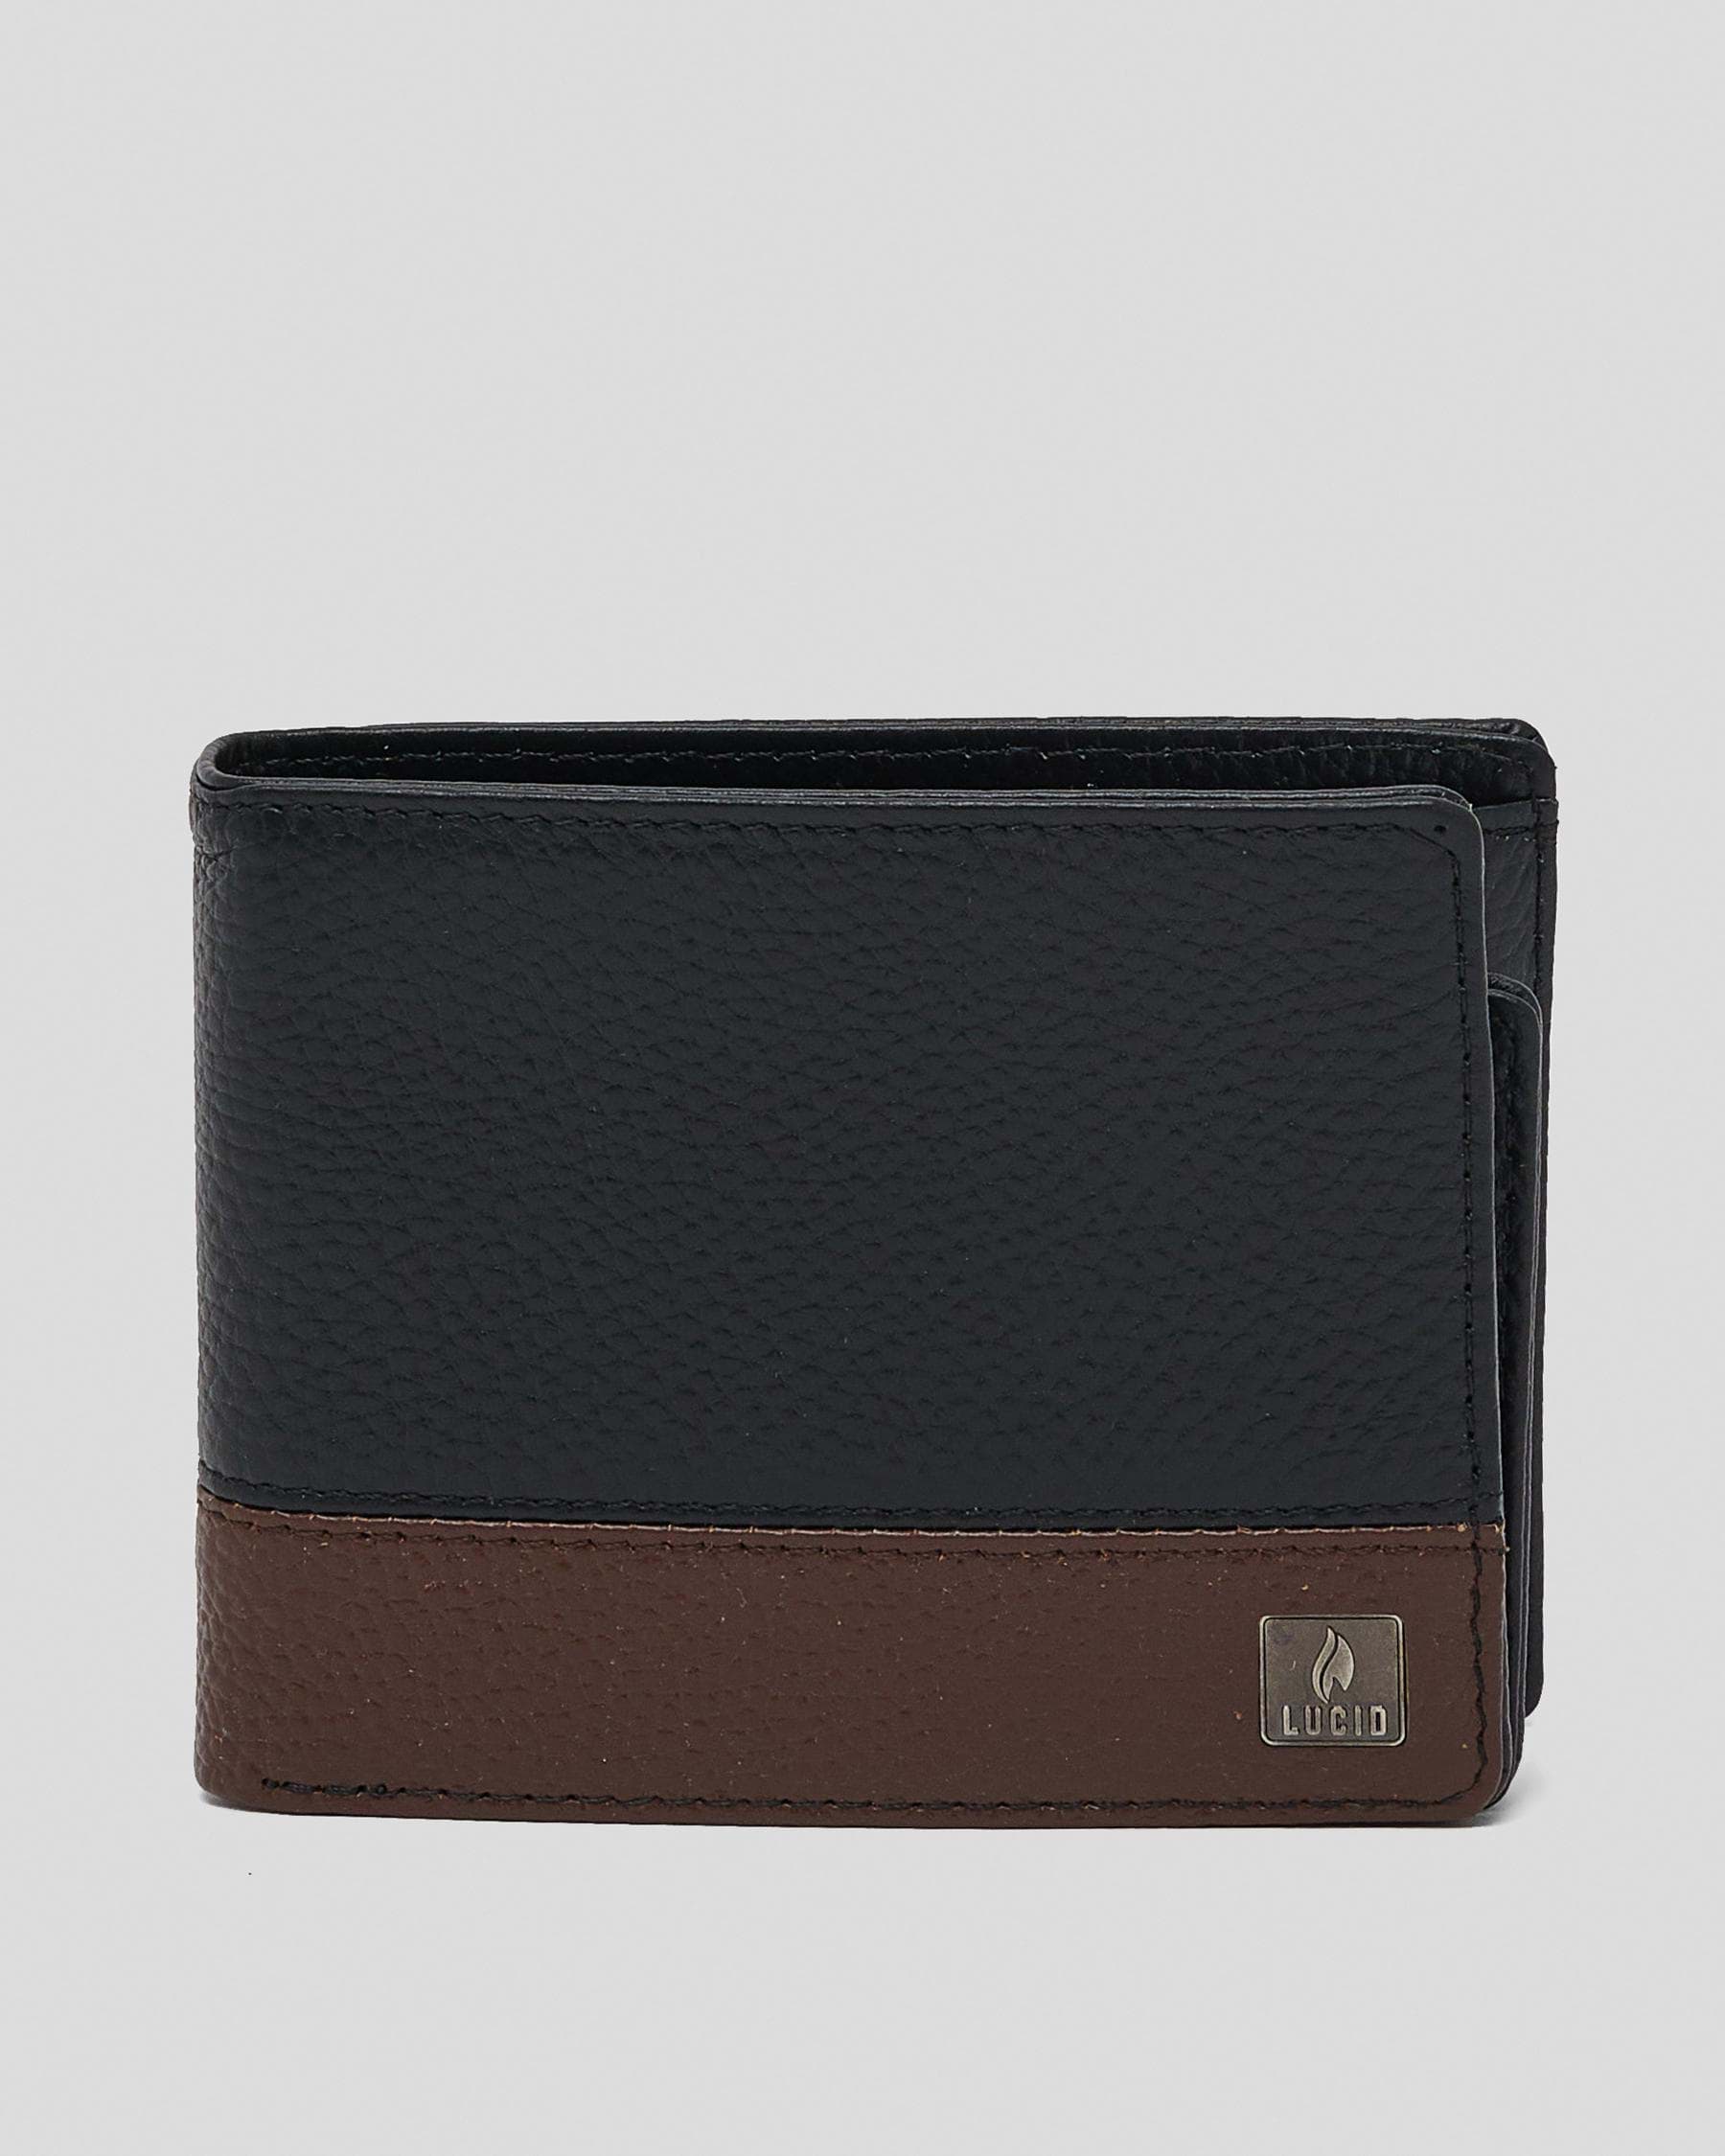 Lucid Creased Wallet In Black - Fast Shipping & Easy Returns - City ...